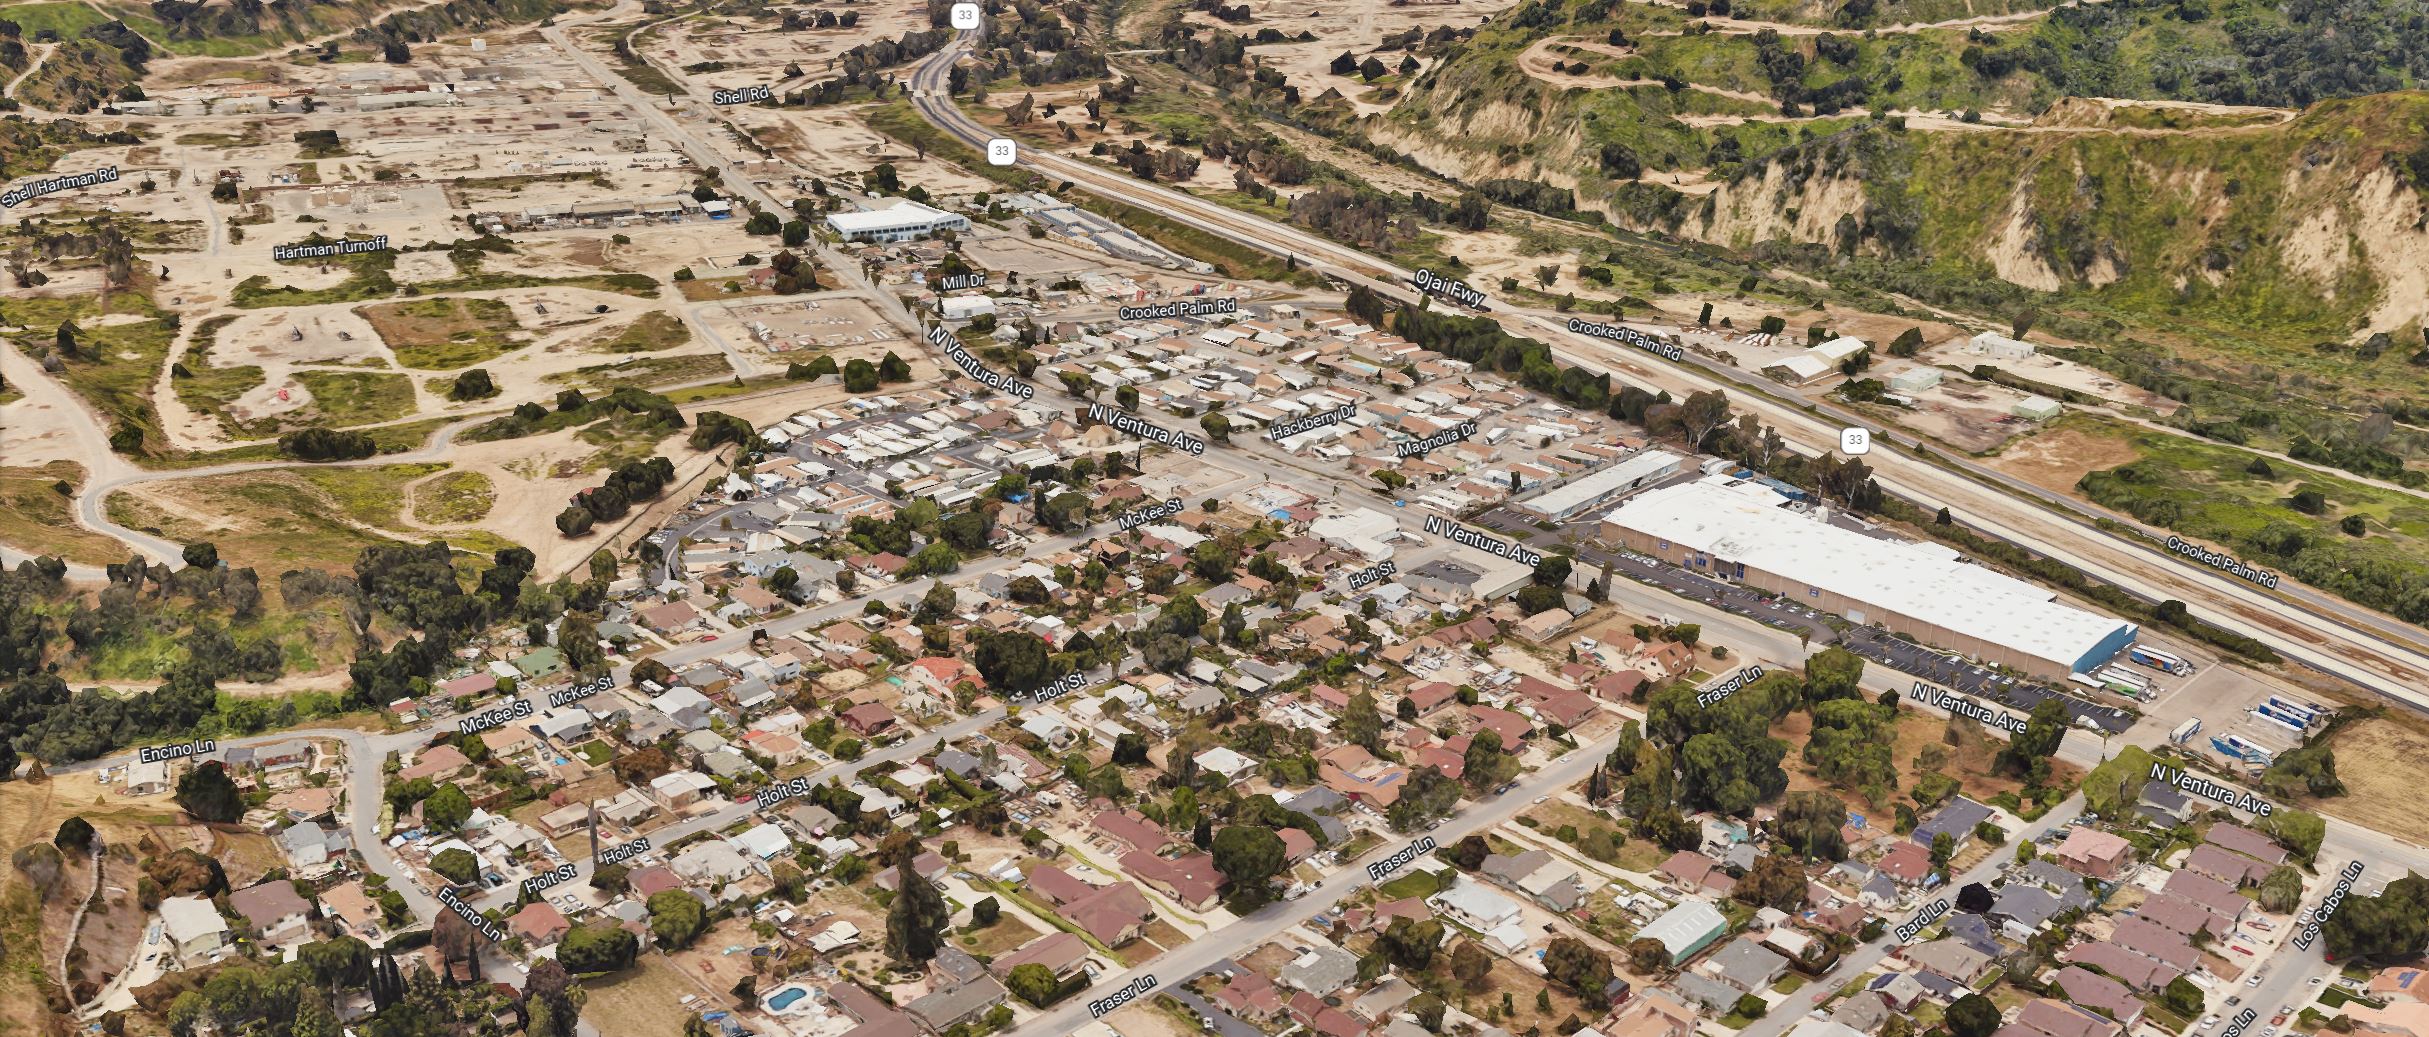 Aerial view of homes and commercial buildings next to a river.